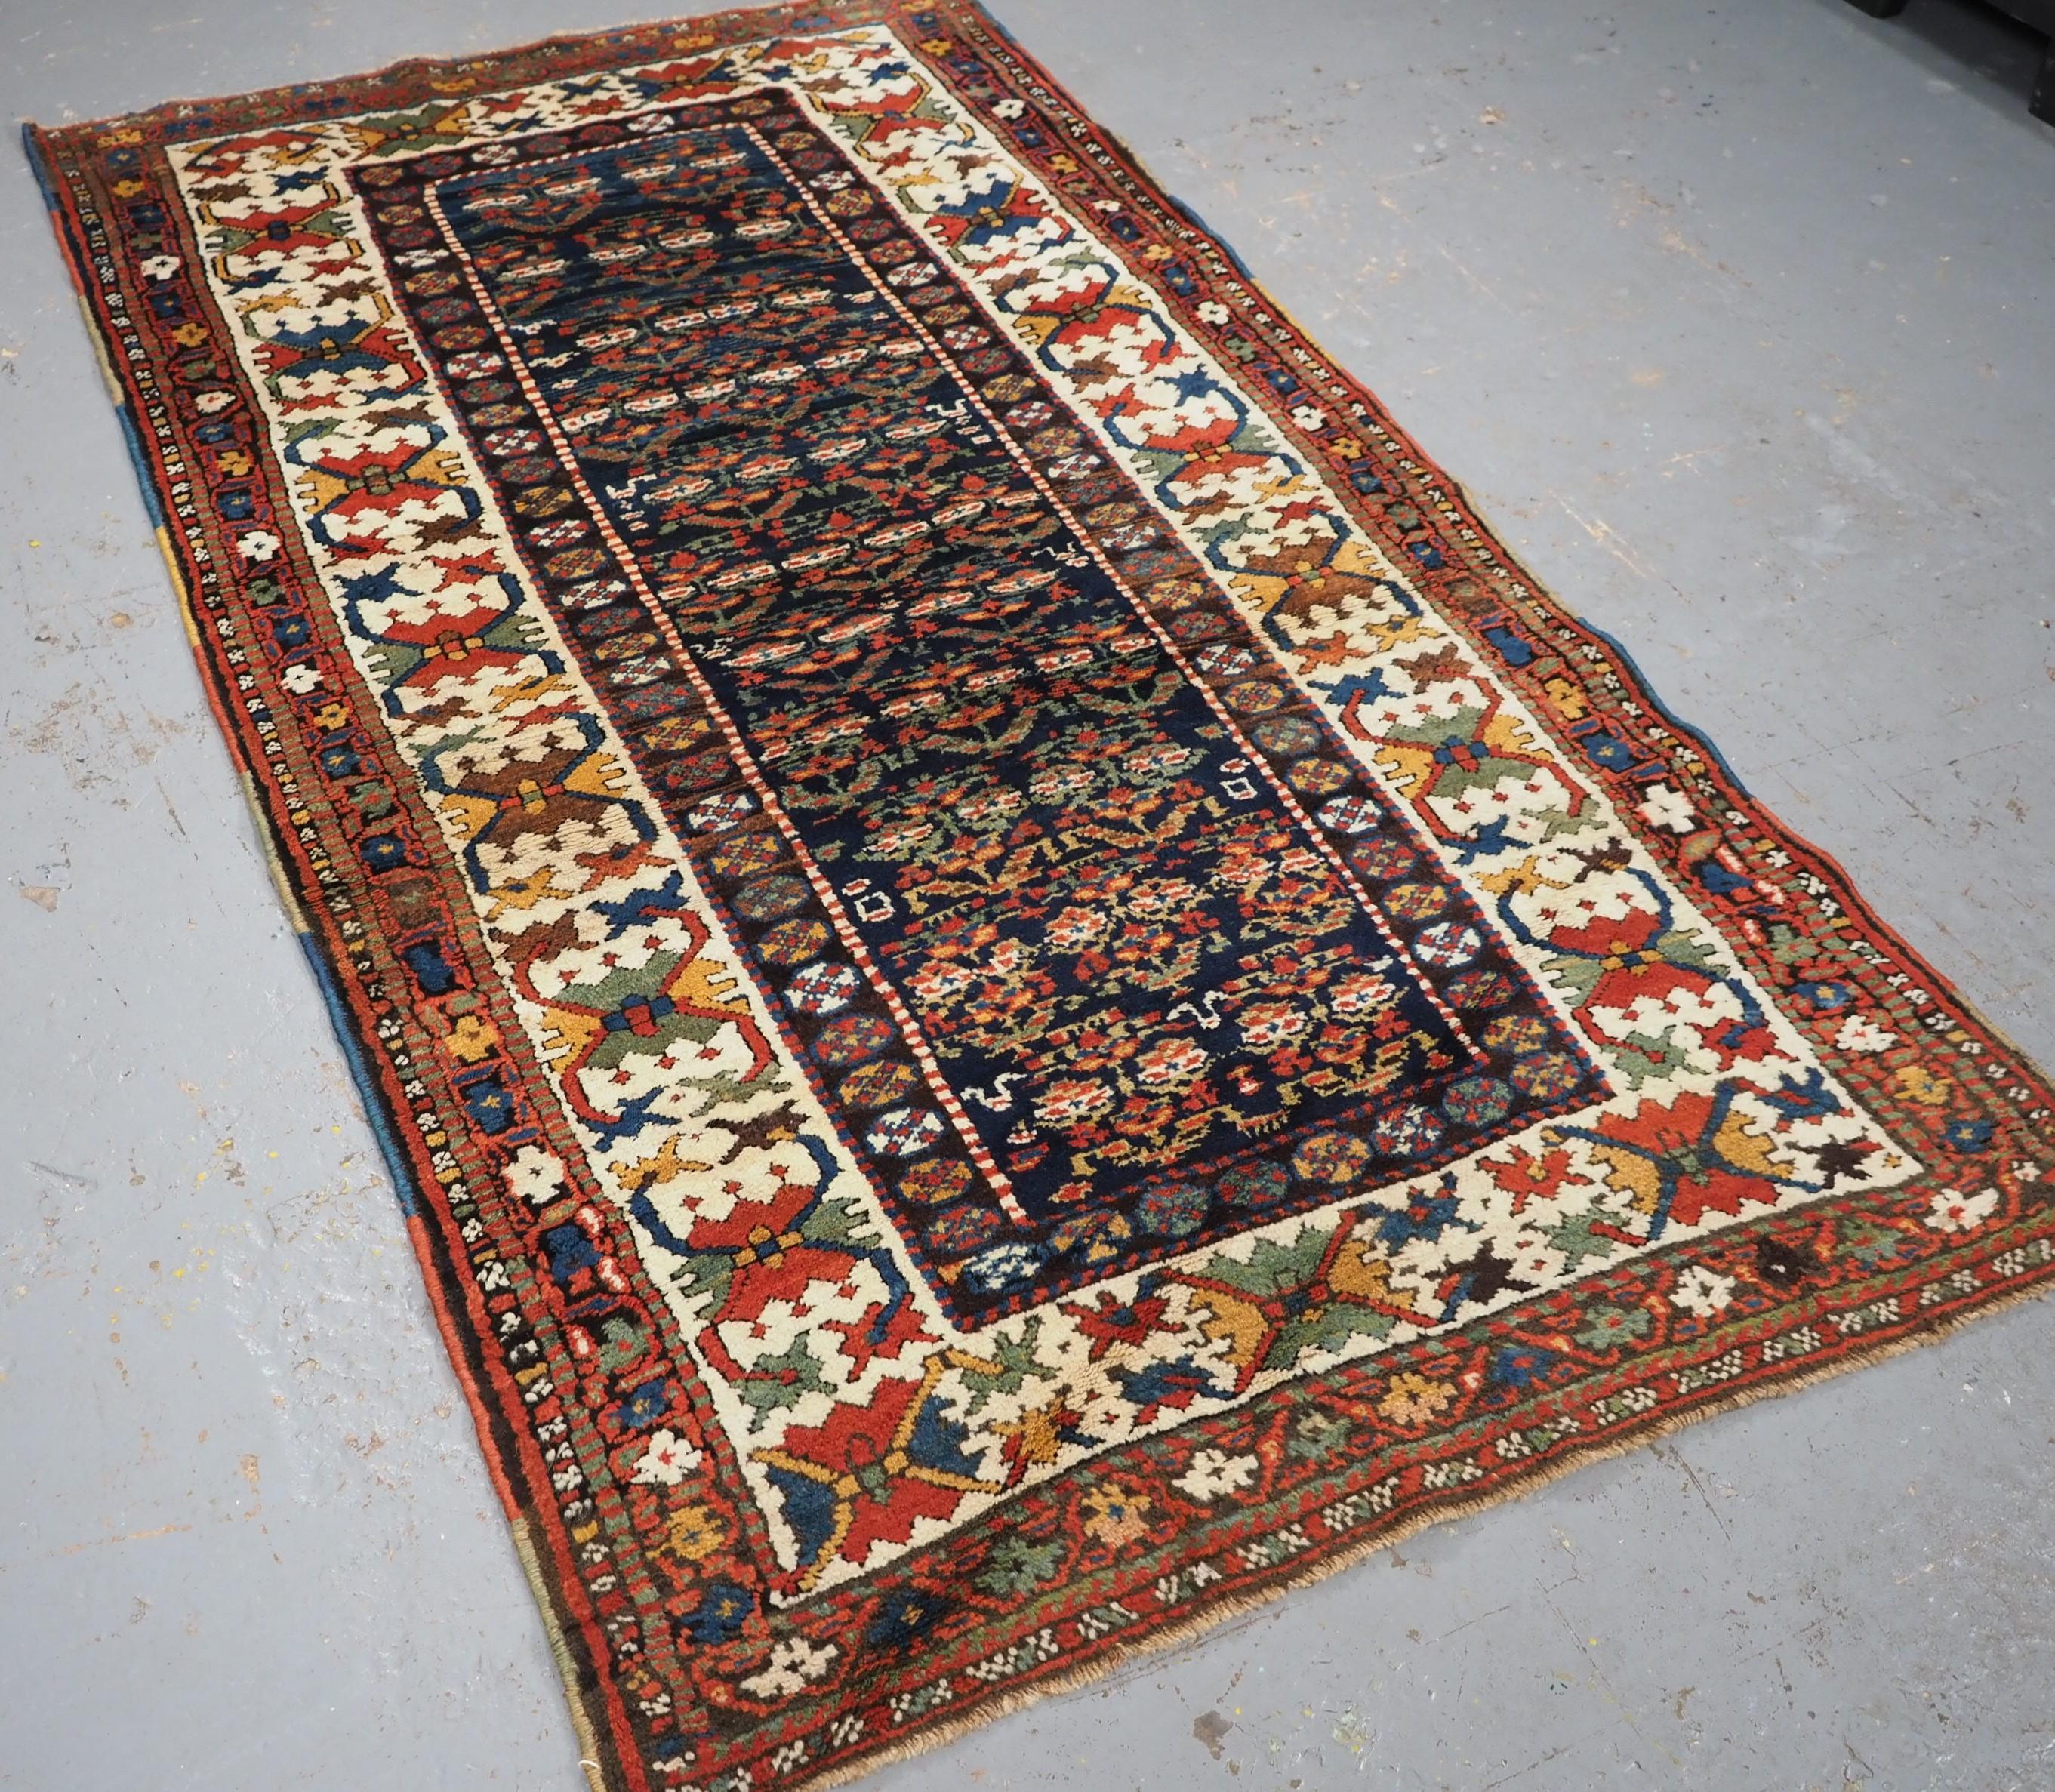 
Size: 7ft 2in x 4ft 0in (219 x 121cm).

Antique Kurdish rug with colourful shrub design.

Circa 1900

This rug is an outstanding example of Kurdish weaving, the colourful shrub design stands out against the midnight blue ground. The wide ivory